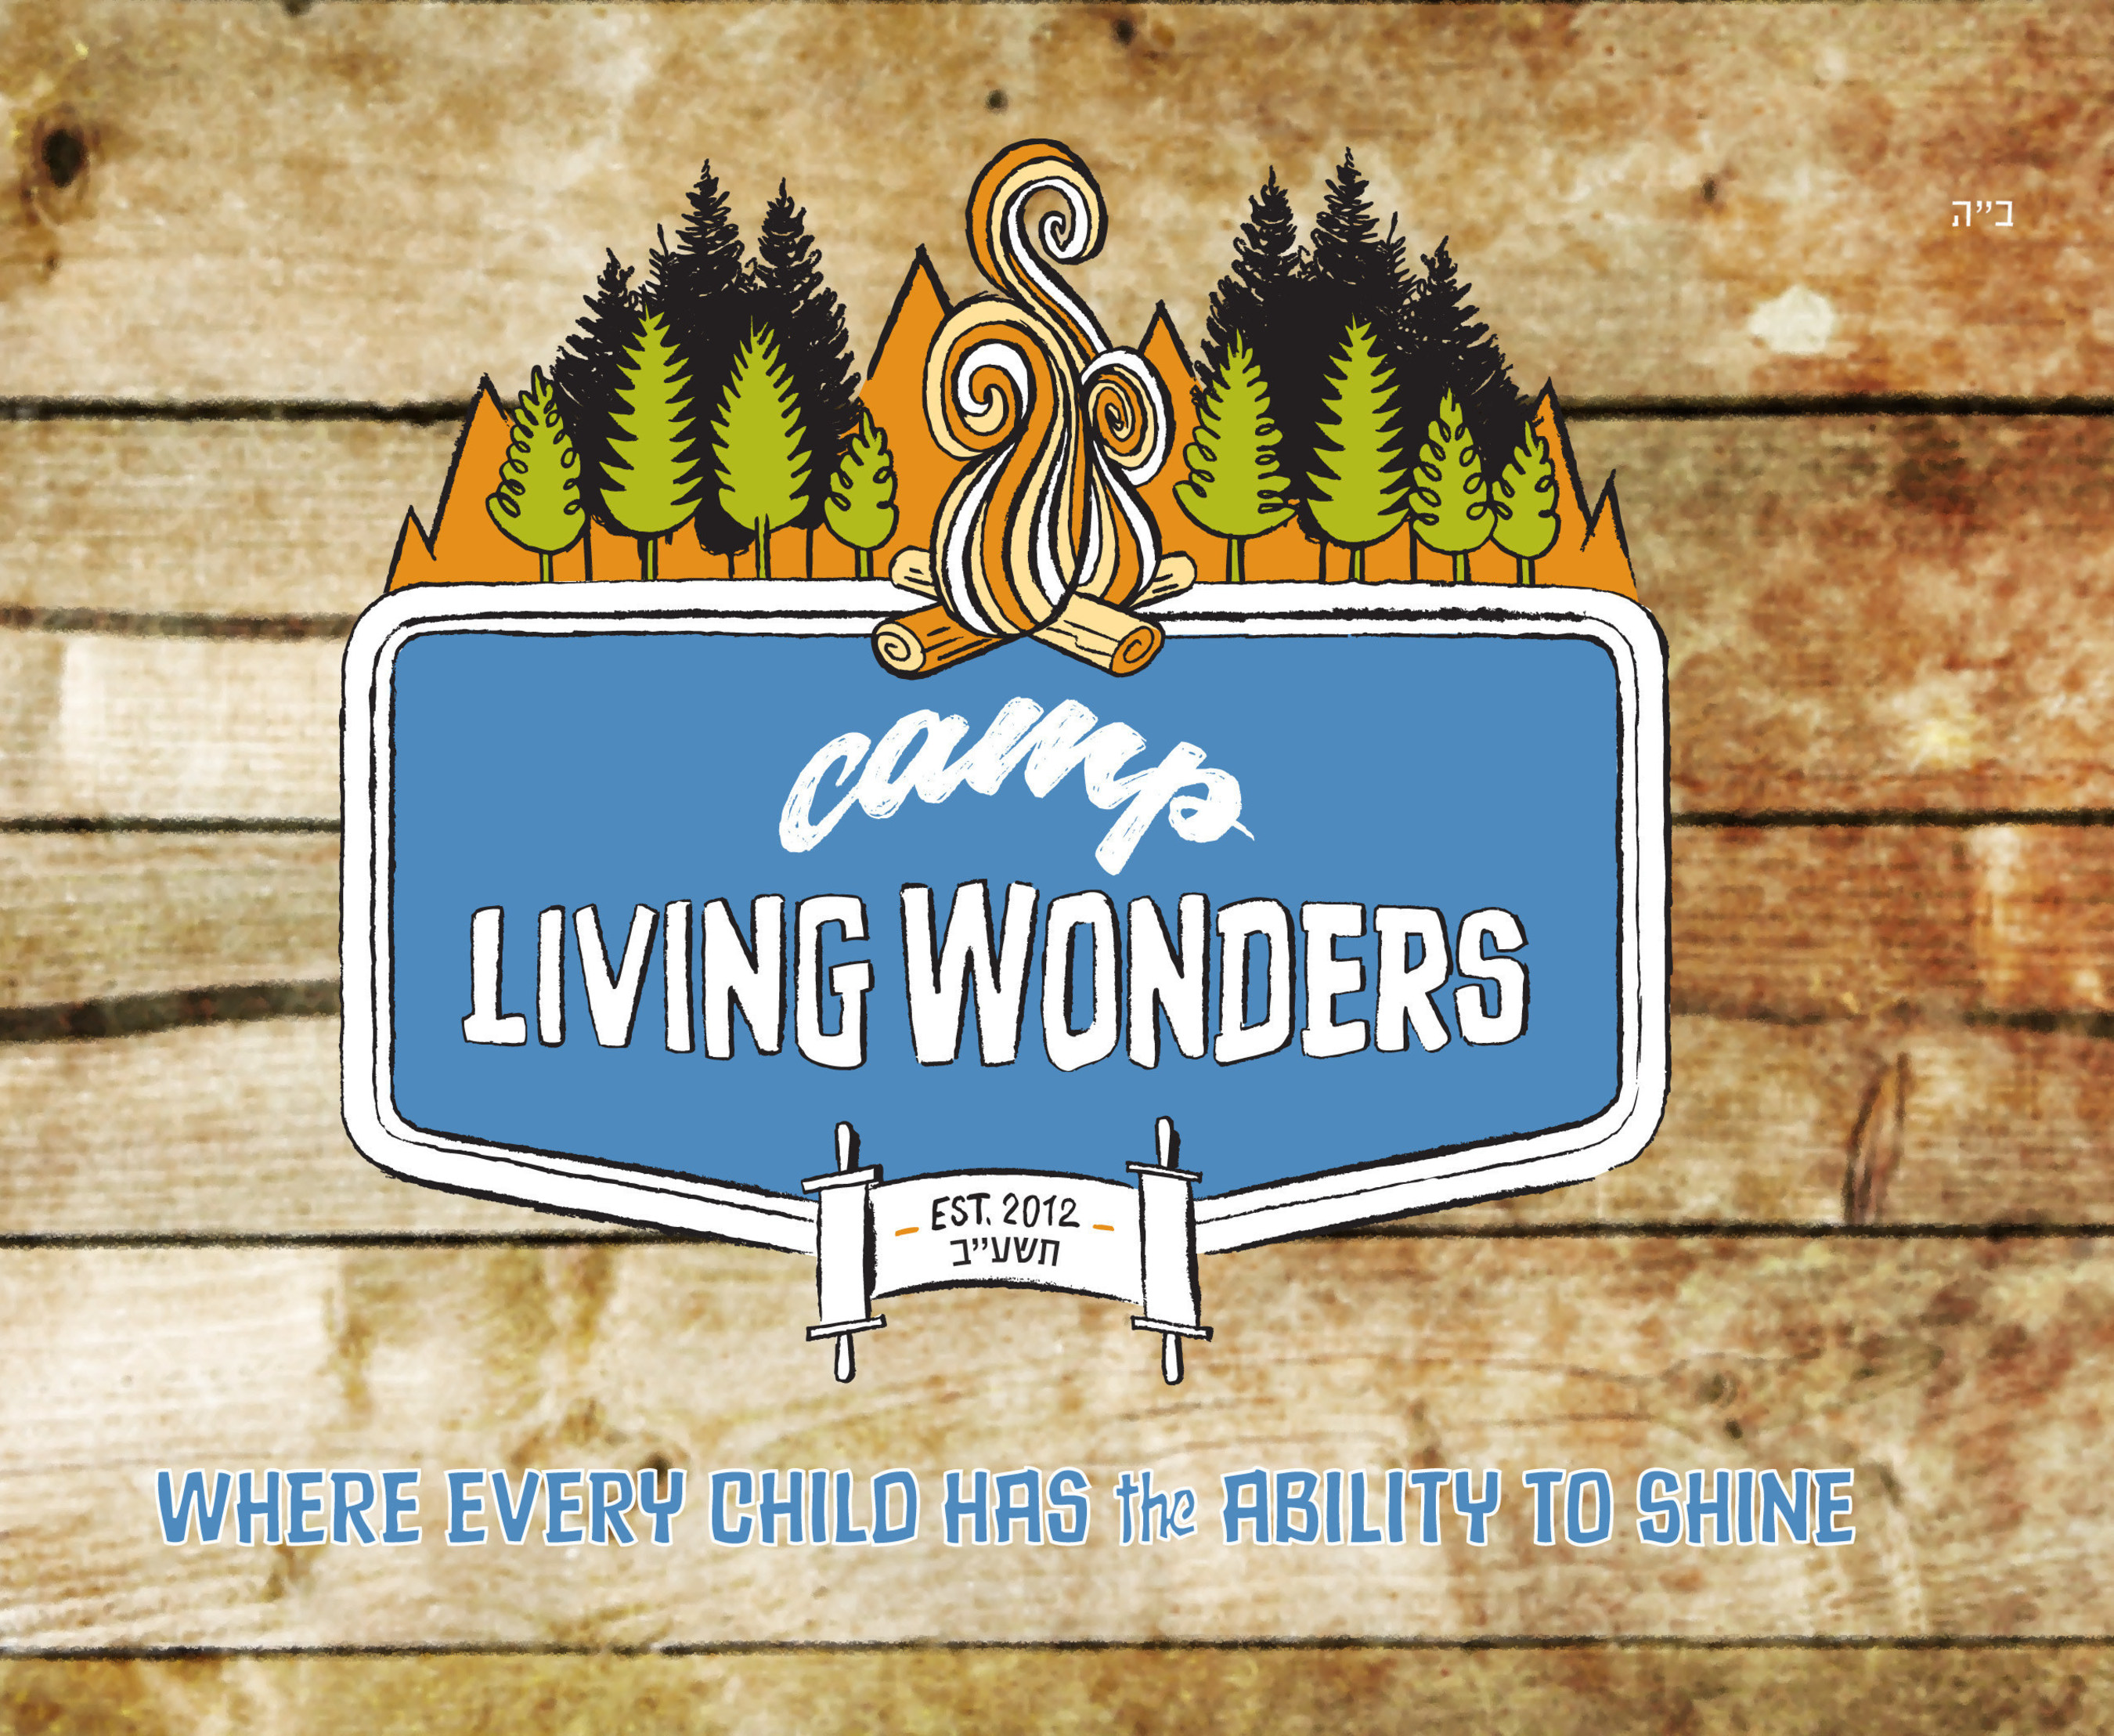 Camp Living Wonders is a 501(c)3 non-profit organization which provides Jewish children with special needs a safe and enriching Summer sleep-away camp experience that fosters growth and brings their dreams to life.